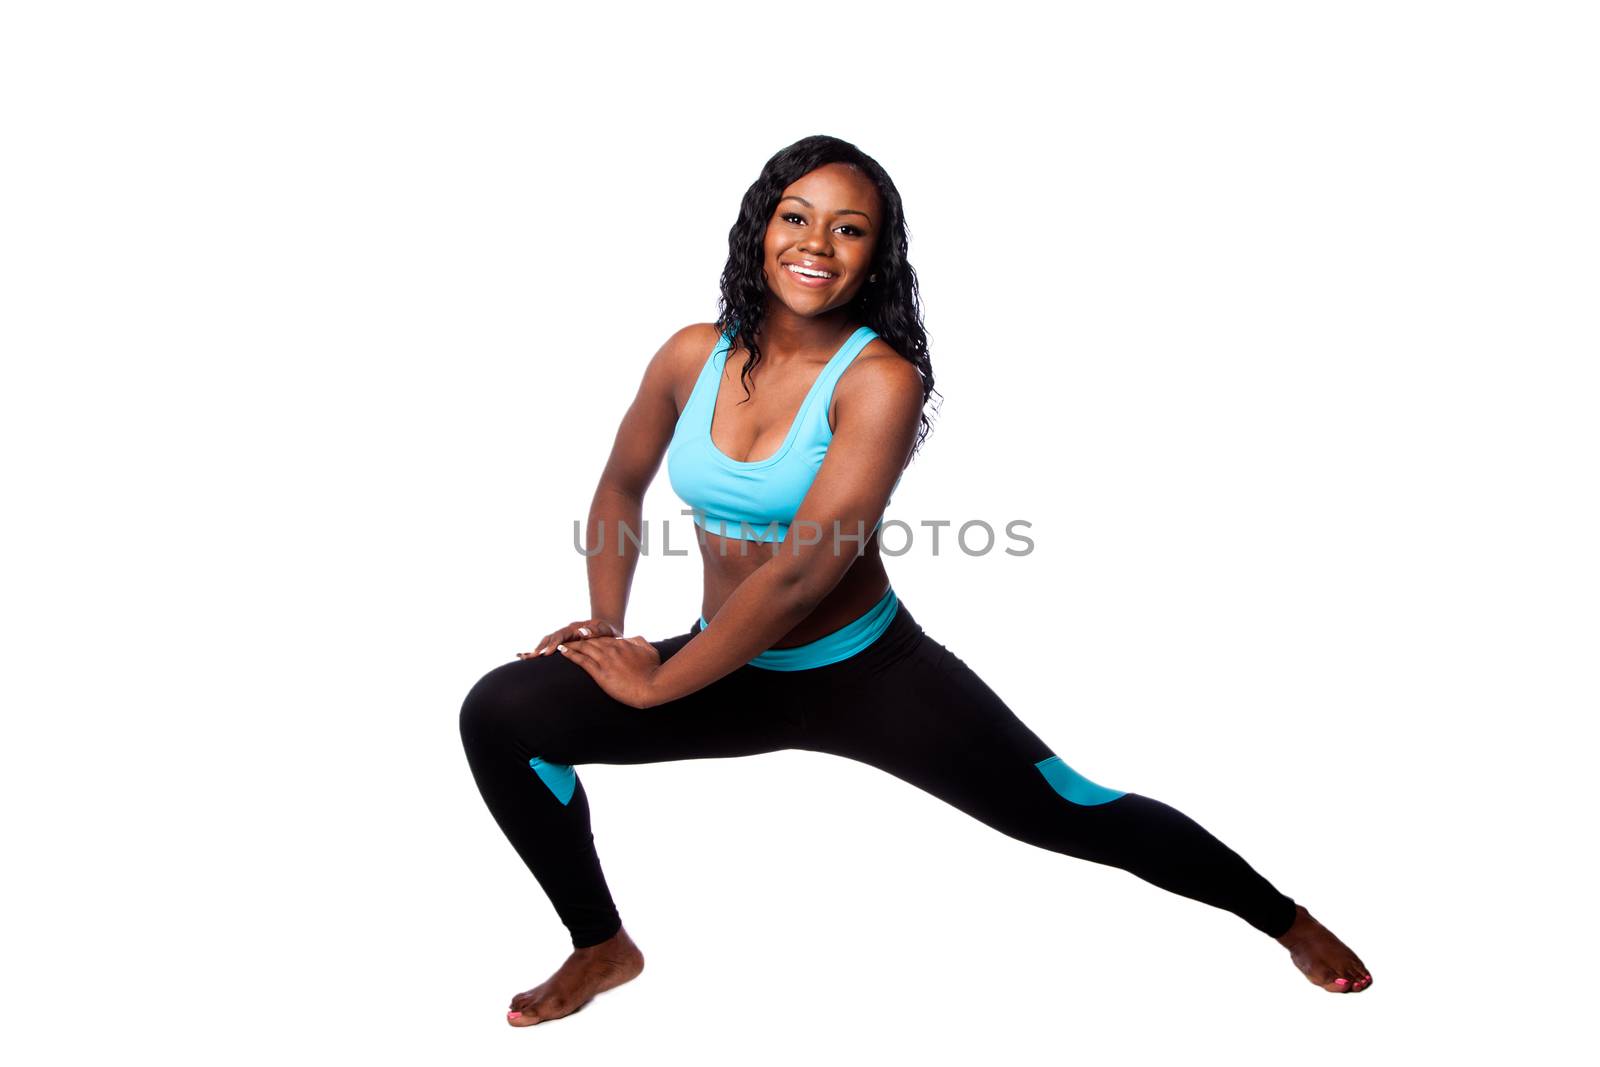 Happy woman doing workout fitness stretching exercise to feel good, bodycare concept, isolated.